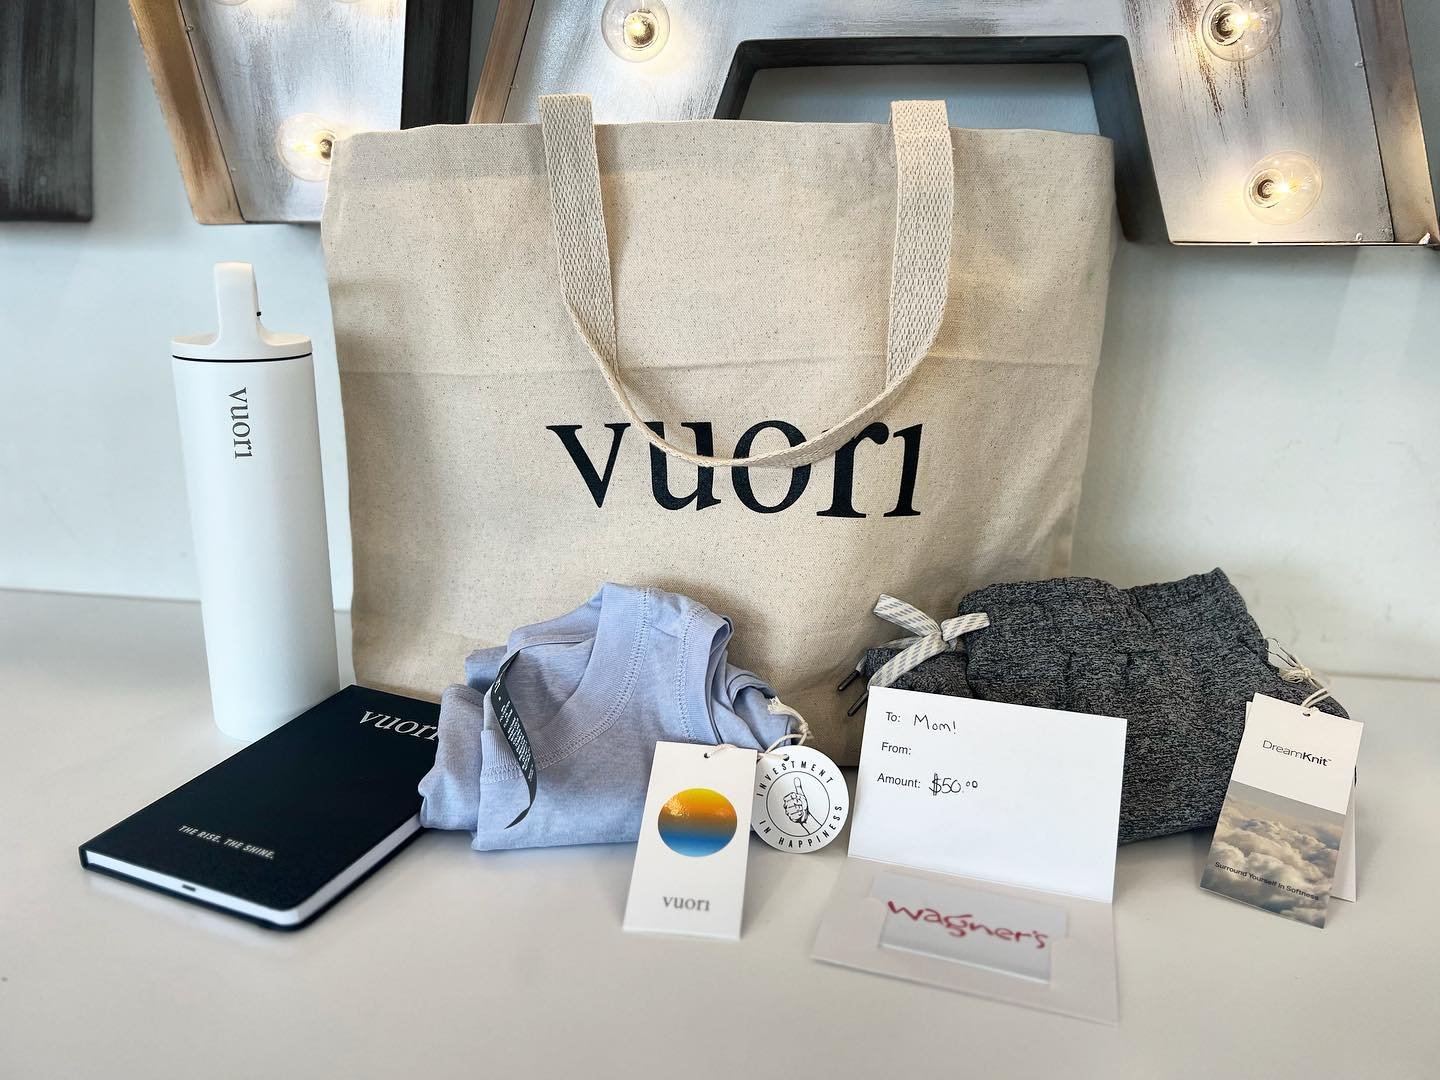 🎉 MOTHER&rsquo;S DAY GIVEAWAY!!
&bull;
One special mumma is going to win this amazing Vuori and Wagner&rsquo;s RunWalk bundle that includes TWO Vuori apparel pieces, a duffel, journal, water bottle and $50 shopping spree at Wagner&rsquo;s RunWalk!!
